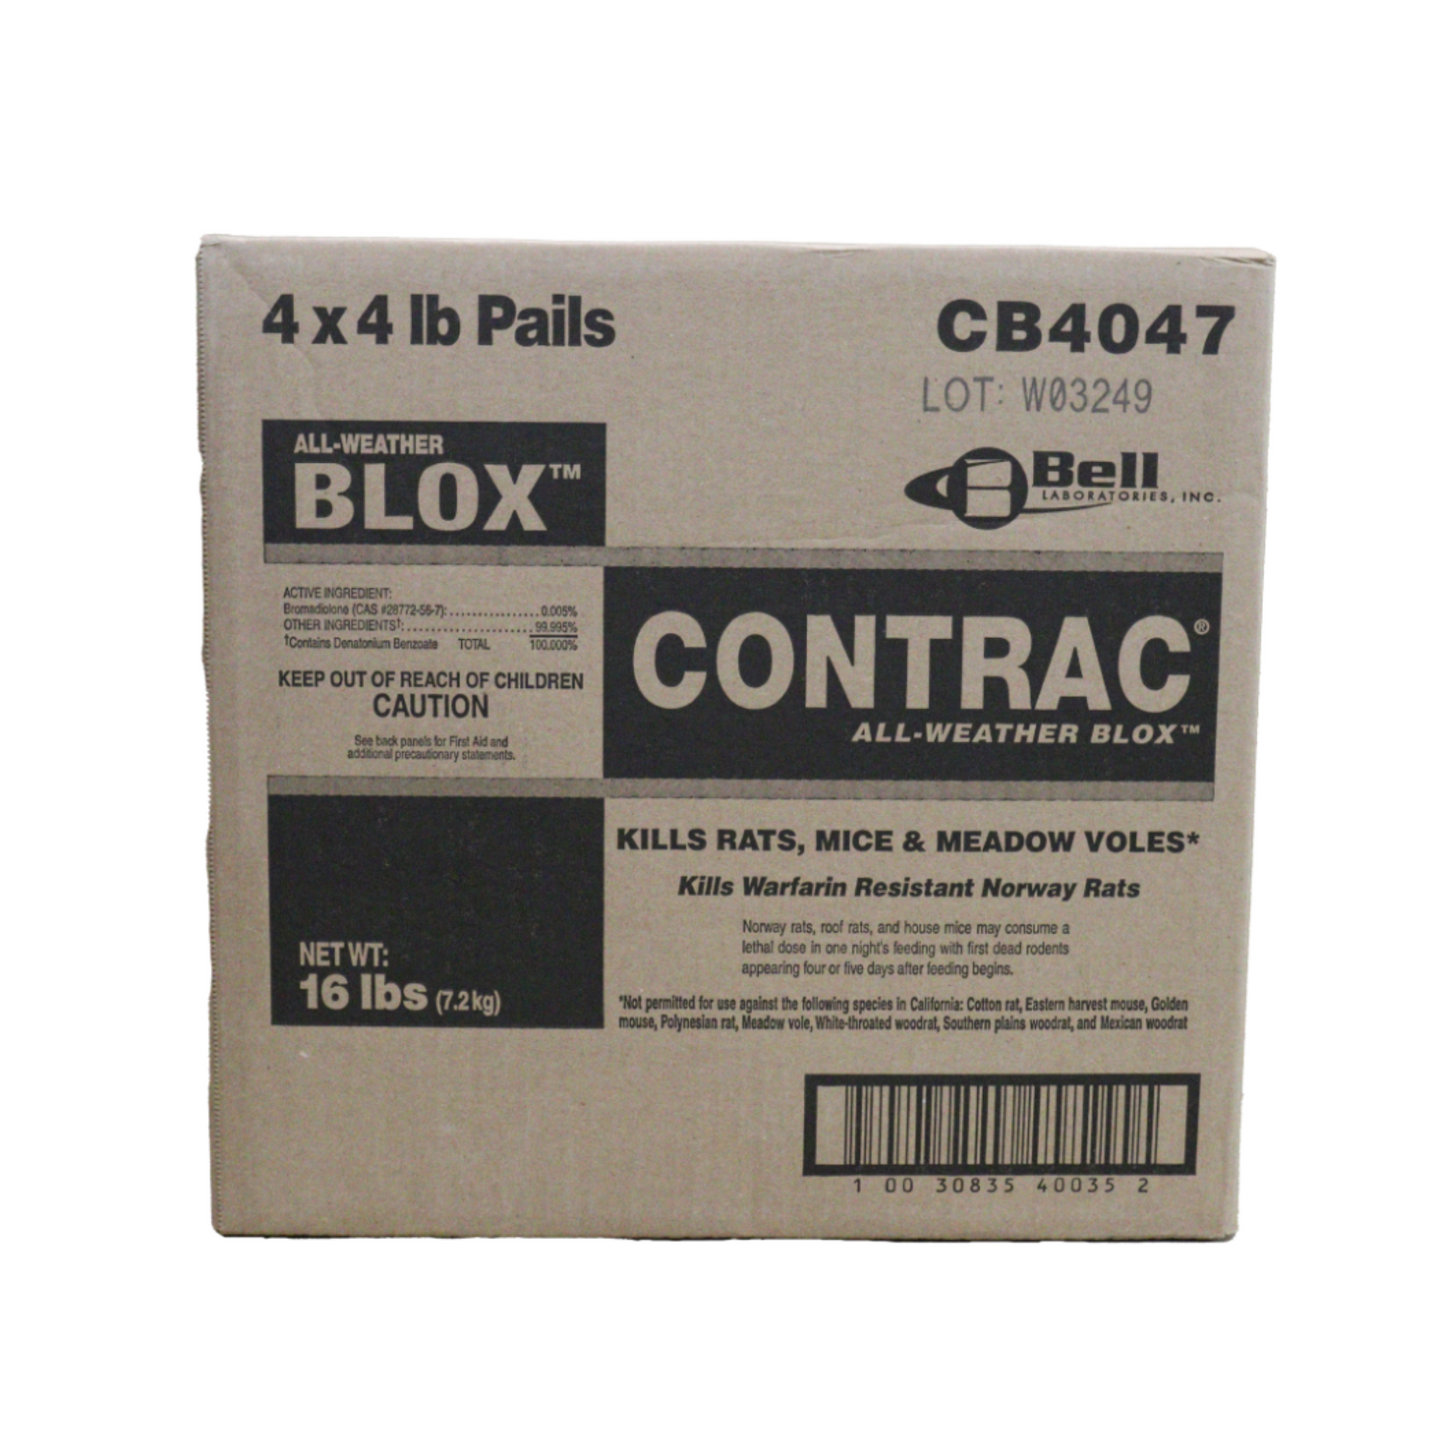 Contrac All Weather Blox